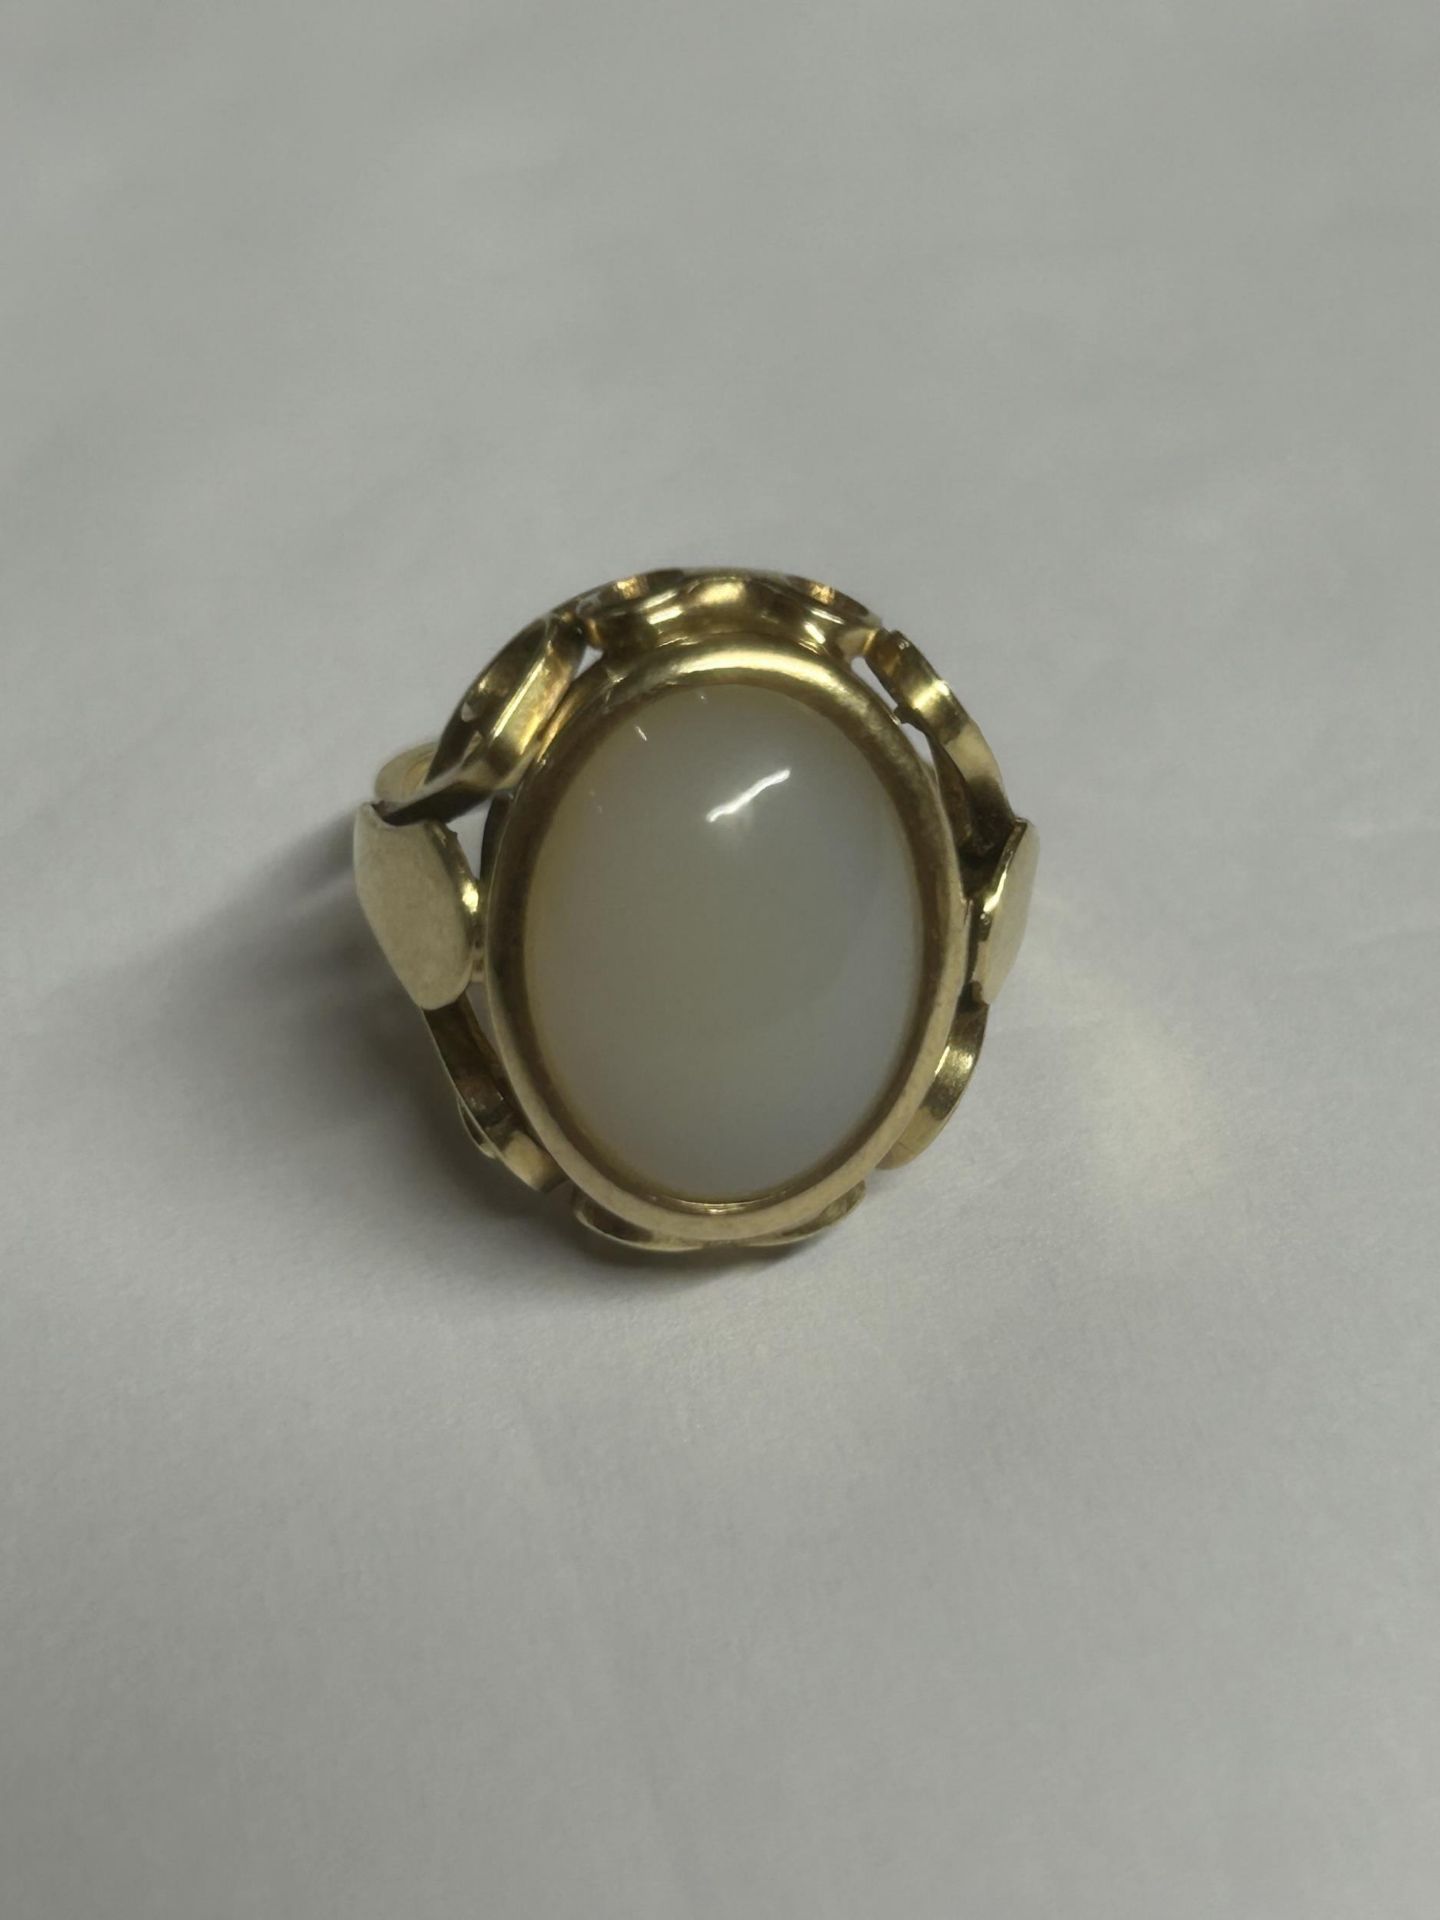 A 14CT GOLD DRESS RING, SIZE L. WEIGHT 5.09 GRAMS - Image 4 of 4